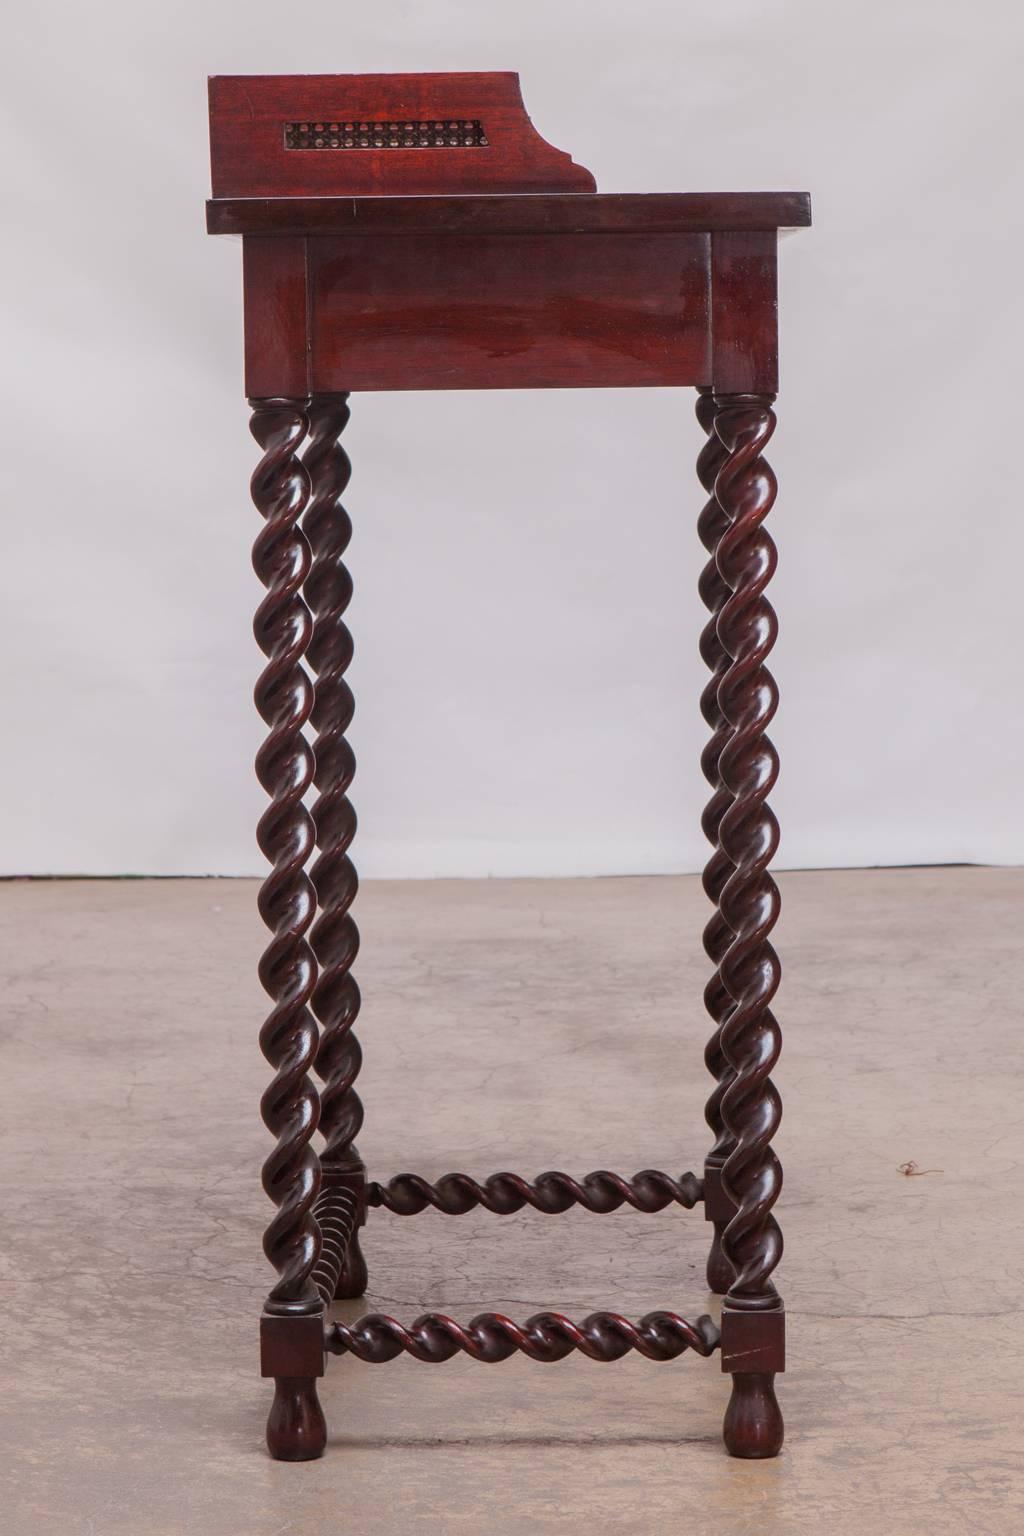 Rare mahogany small writing table or telephone table featuring long barley twist legs and stretchers. Galleried top with a decorative cane insert and small bookshelf underneath. Small enough to fit just about anywhere from an old interior decorator